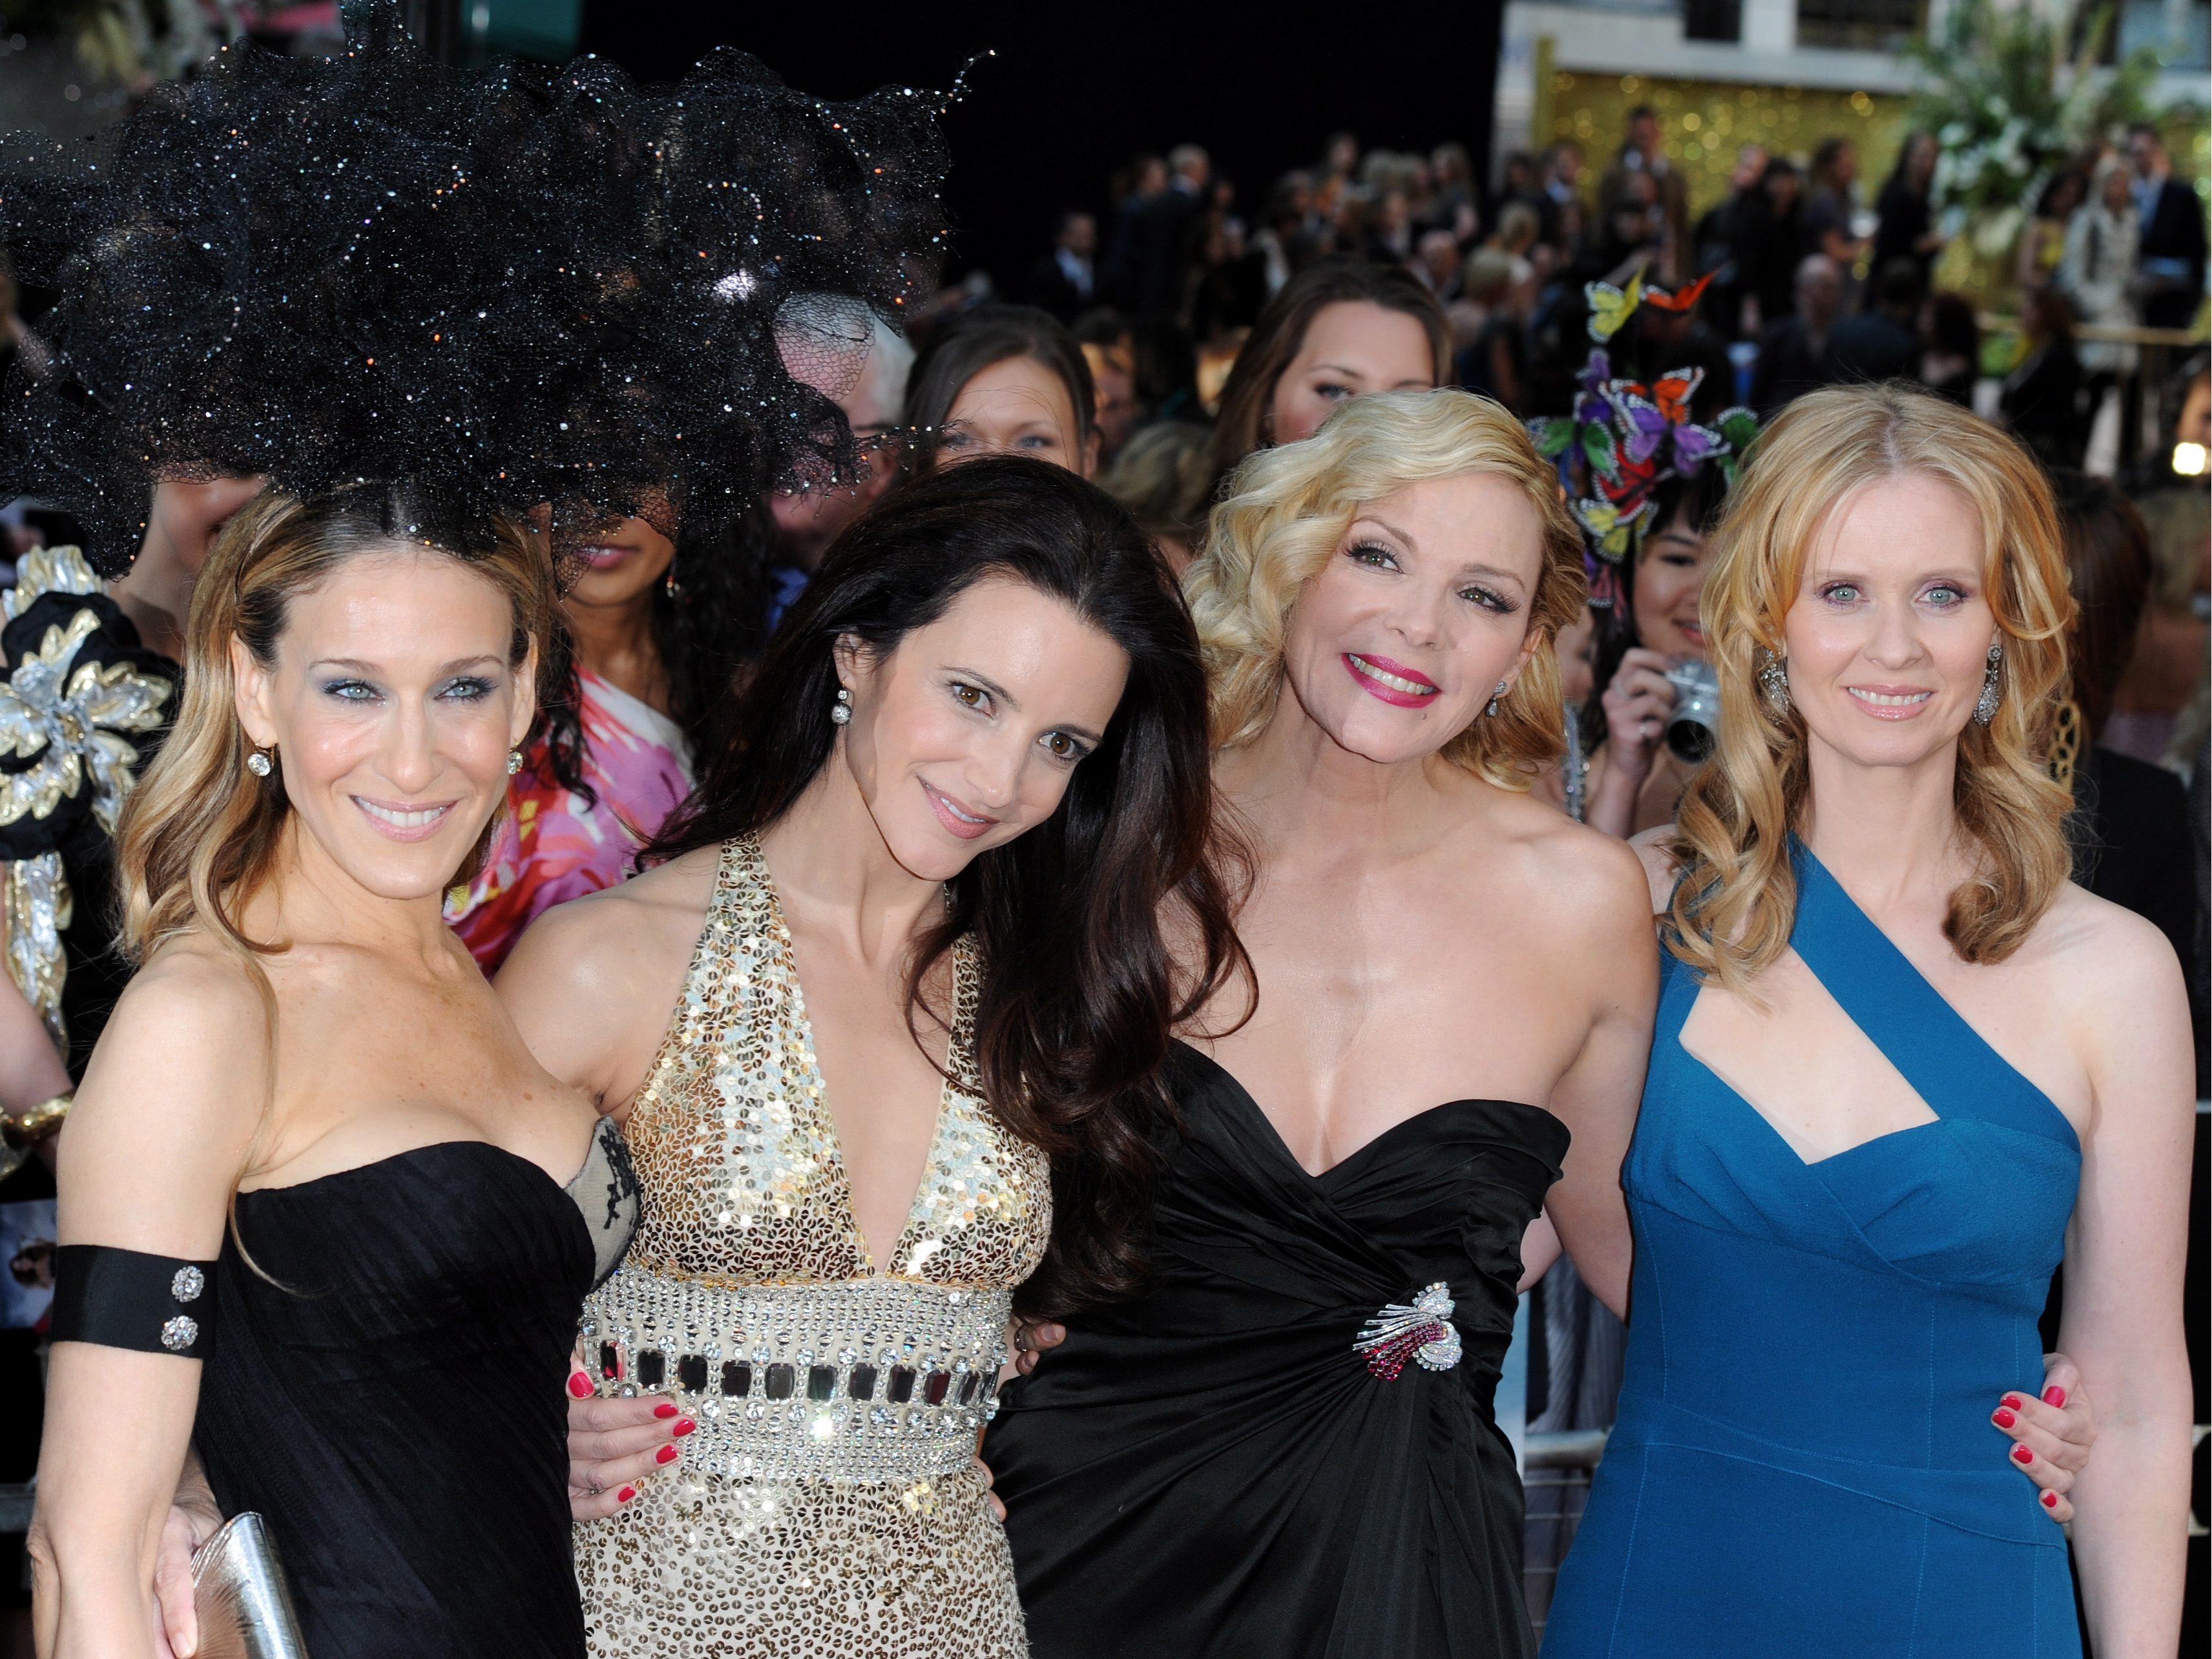 epa02176146 Cast members (L-R) US actress Sarah Jessica Parker, US actress Kristin Davis, British actress Kim Cattrall, US actress Cynthia Nixon arrive at the UK film premiere of 'Sex and the City 2' held at the Odeon Leicester Square, in Central London, Britain, 27 May 2010. The movie by US director/writer Michael Patrick King is a sequel to the 2008 film Sex and the City, based on the HBO television series of the same name.  EPA/DANIEL DEME